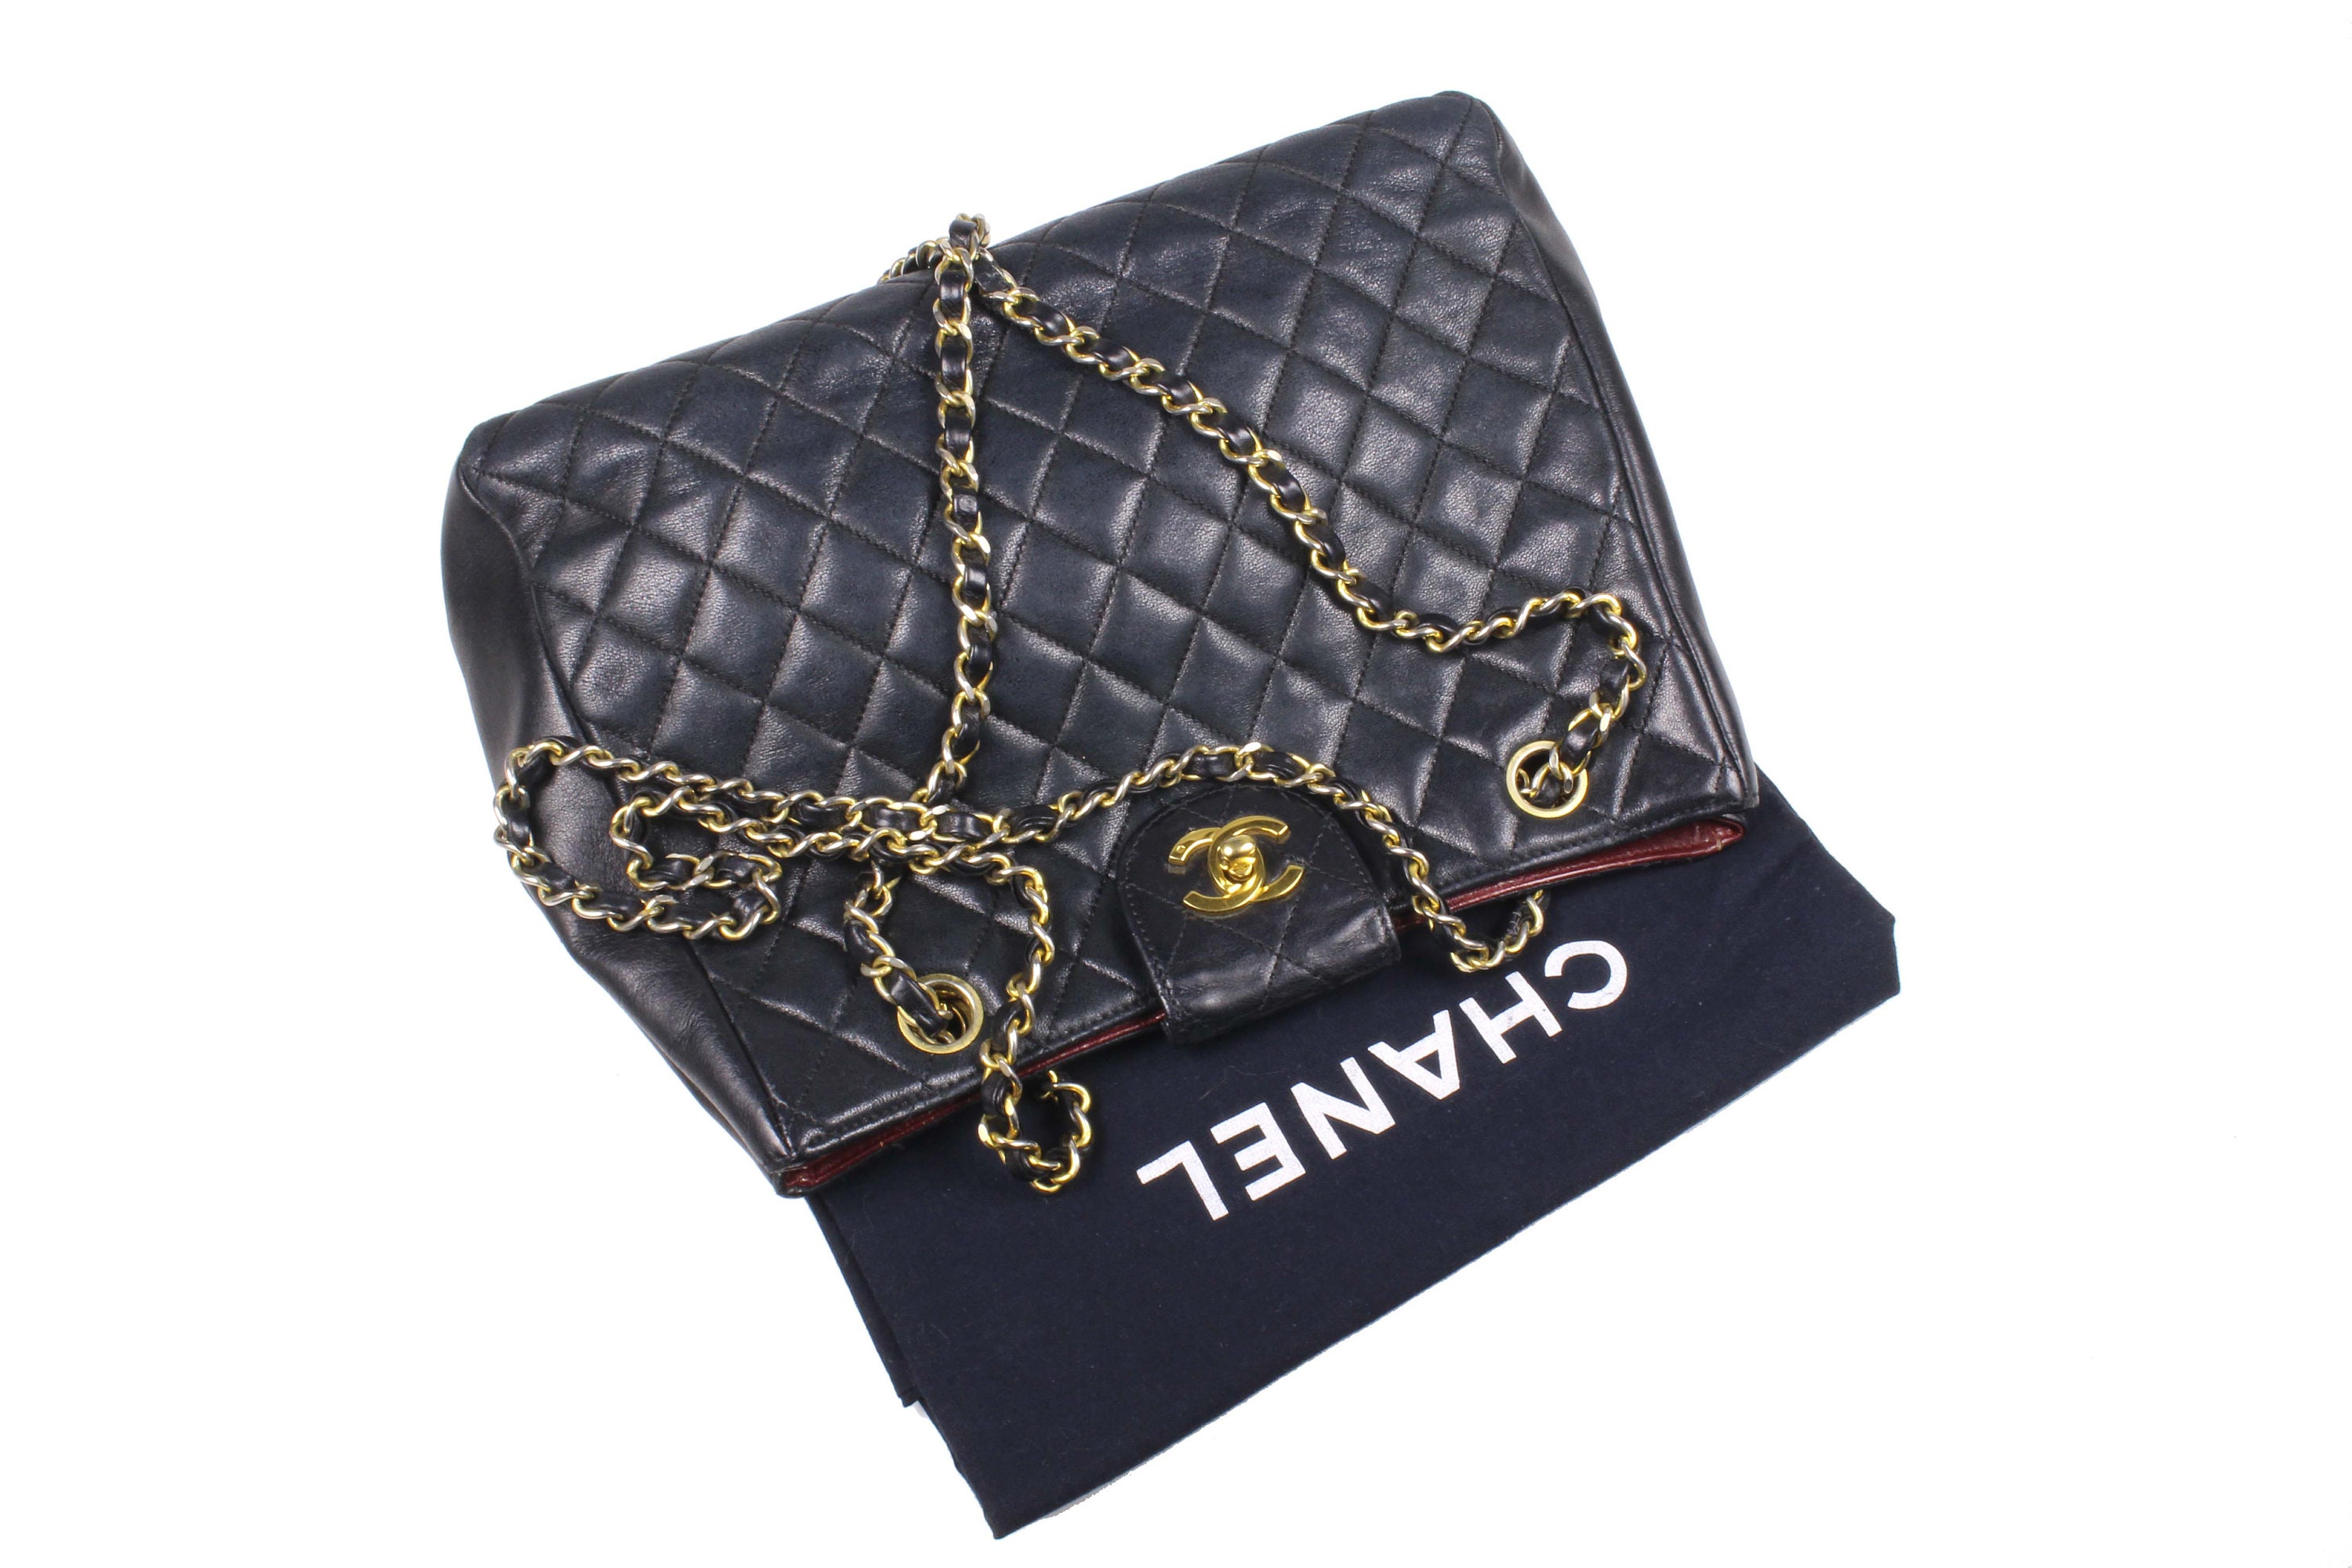 CHANEL Vintage 1990's Quilted Leather Tote Bag 